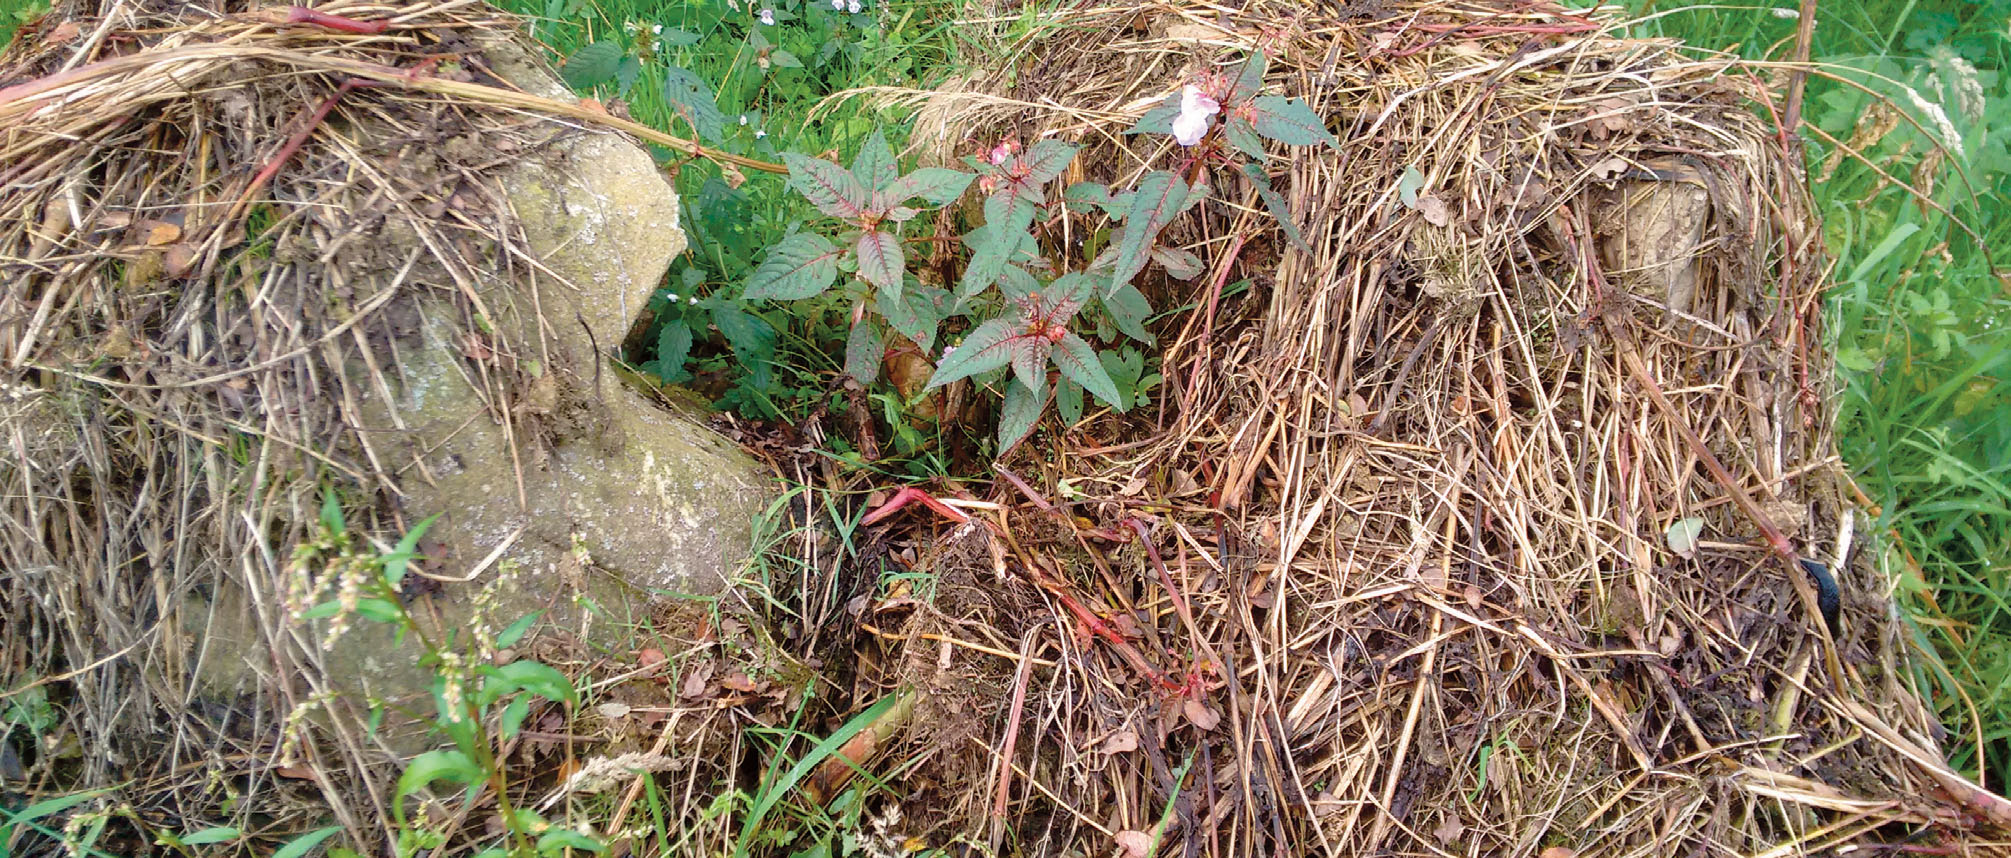 Pulled Himalayan balsam plants that have been placed on a rock to dry out